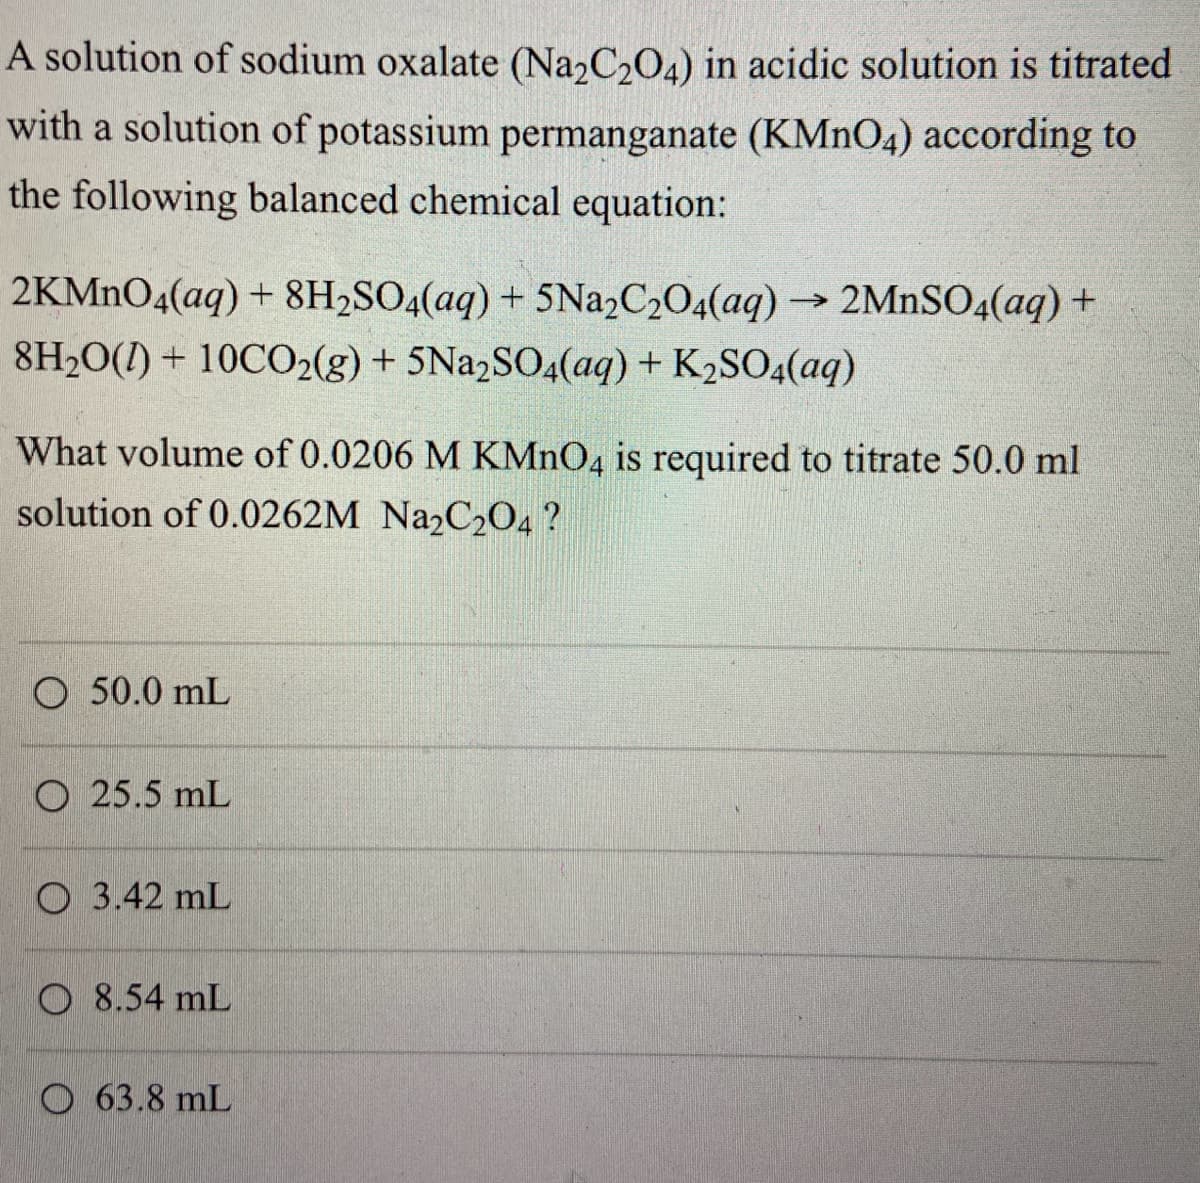 A solution of sodium oxalate (Na2C2O4) in acidic solution is titrated
with a solution of potassium permanganate (KMnO4) according to
the following balanced chemical equation:
2KMnO4(aq) + 8H₂SO4(aq) + 5Na2C2O4(aq) → 2MnSO4(aq) +
8H₂O()+10CO2(g) + 5Na2SO4(aq) + K₂SO4(aq)
What volume of 0.0206 M KMnO4 is required to titrate 50.0 ml
solution of 0.0262M Na2C2O4?
O 50.0 mL
O 25.5 mL
3.42 mL
O8.54 mL
O63.8 mL